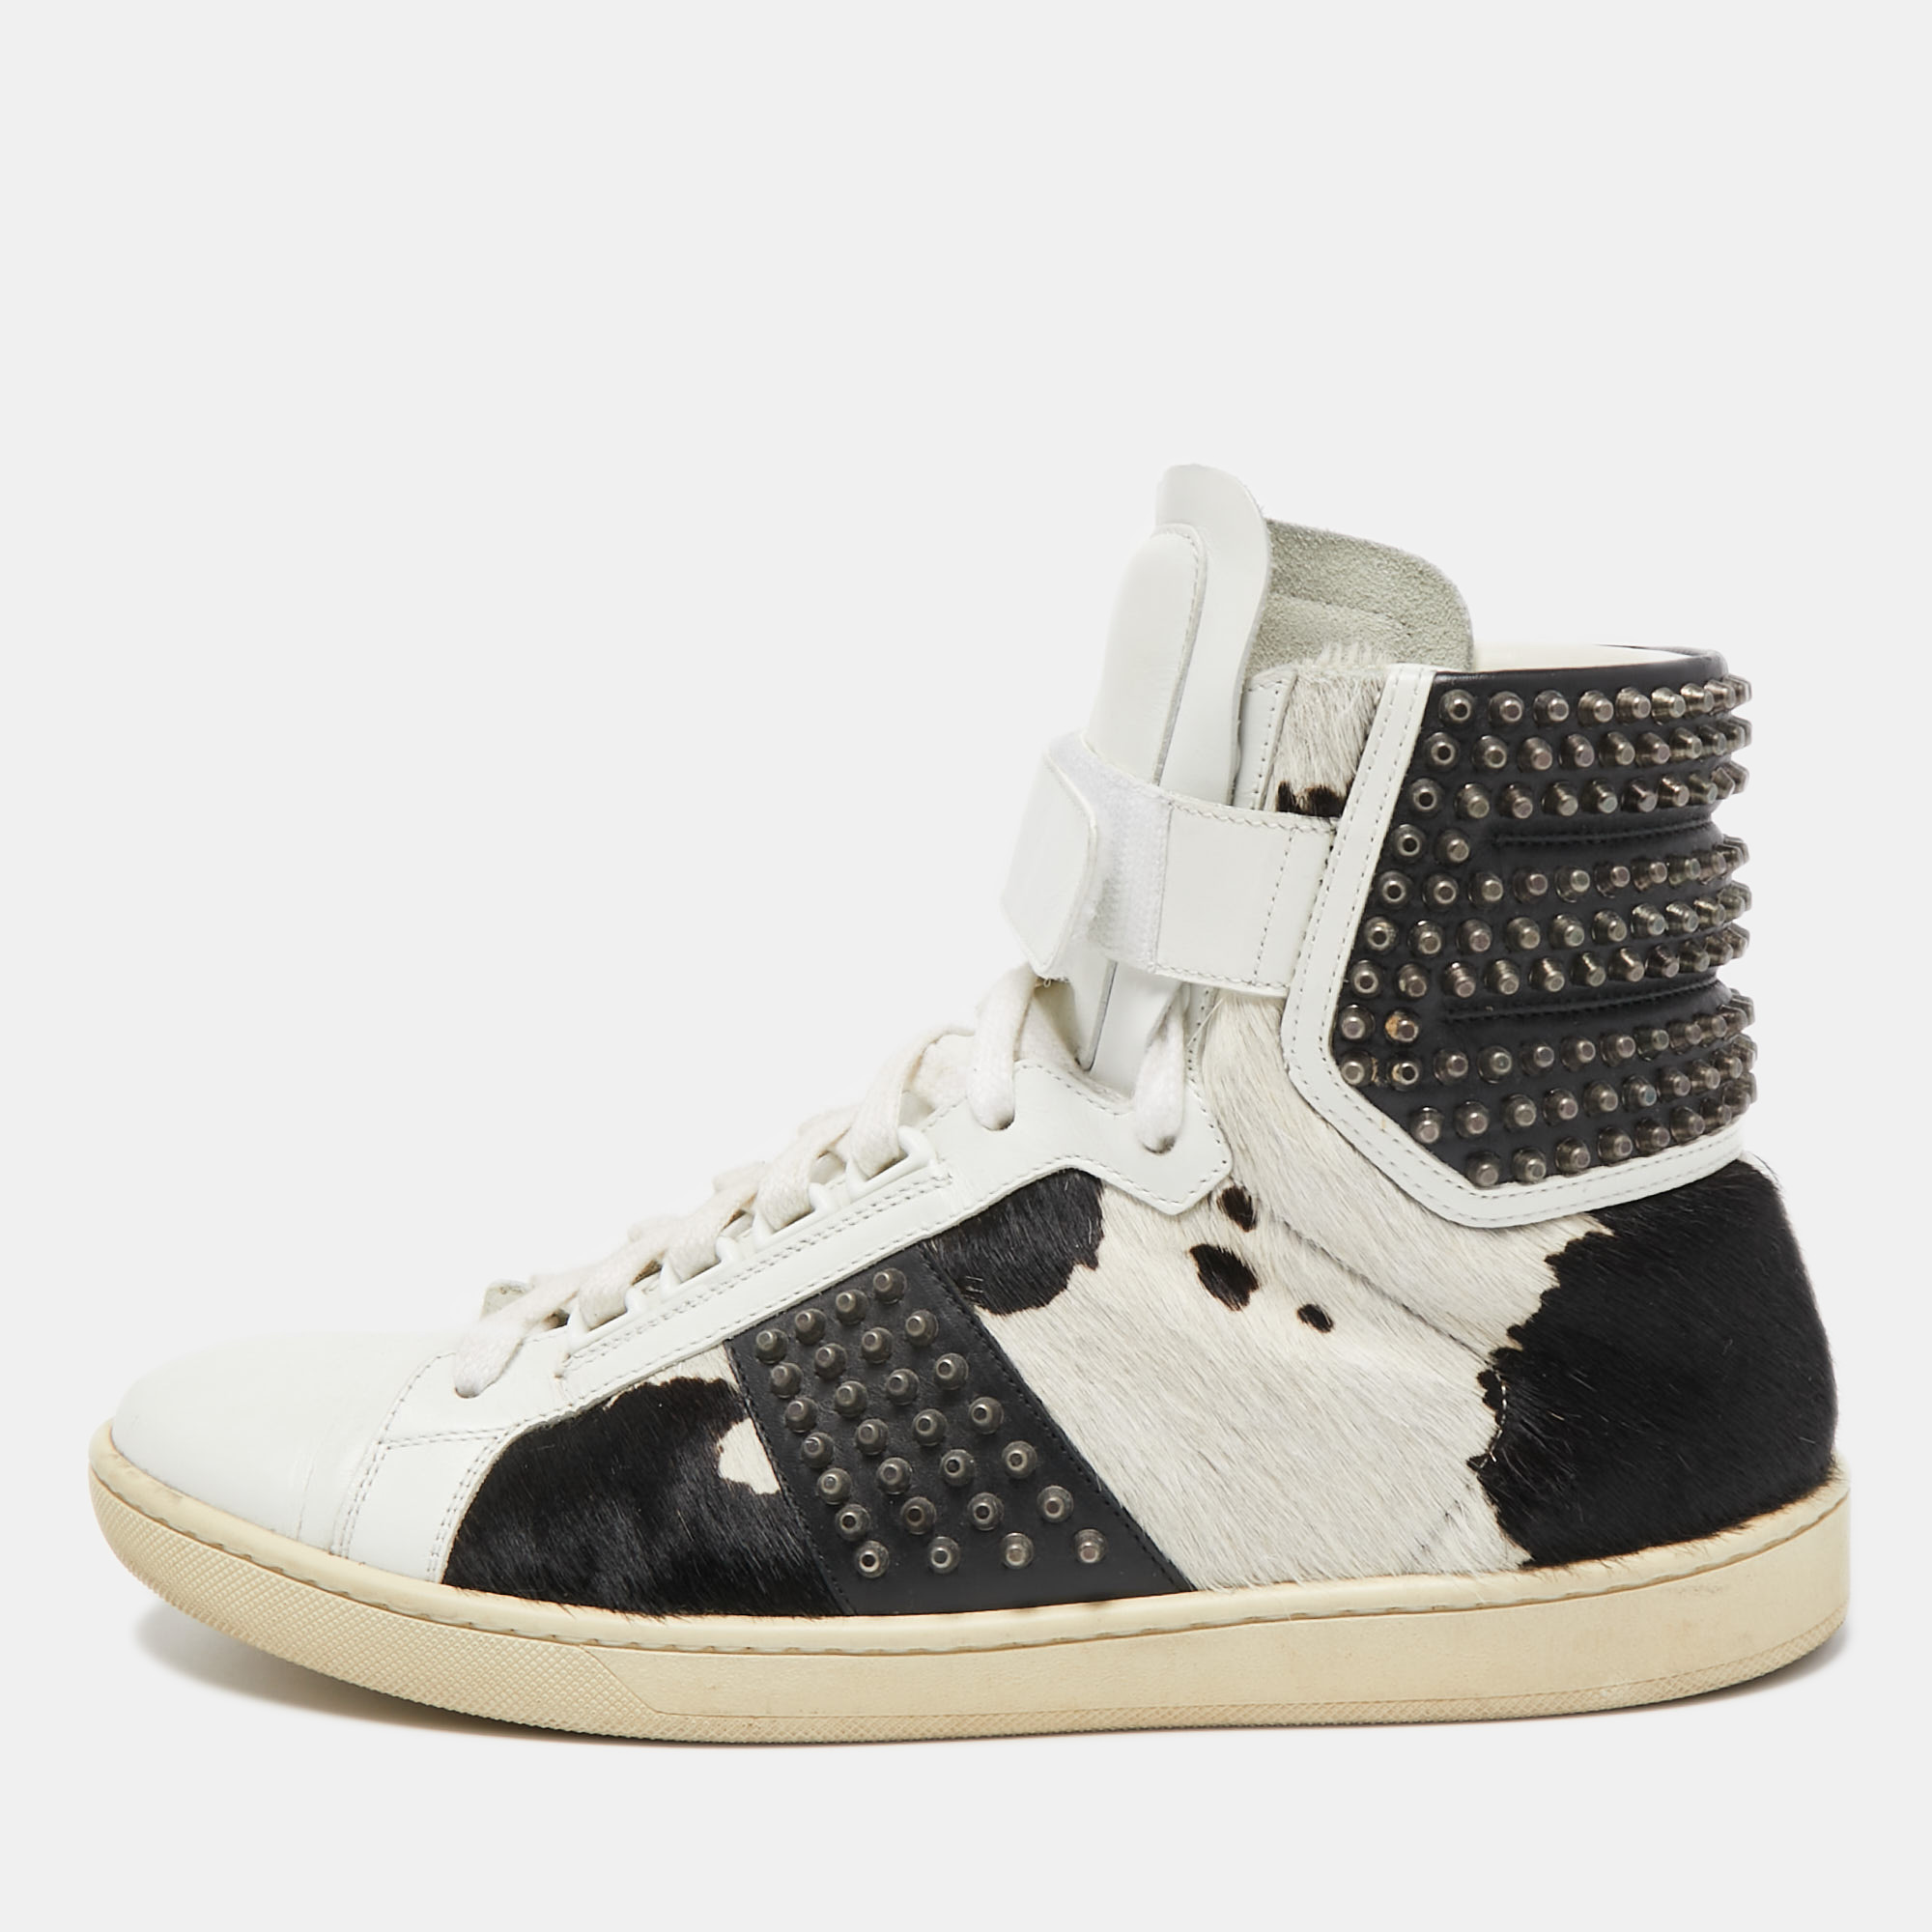 Saint Laurent Black/White Leather And Calf Hair Studded High Top Sneakers Size 41